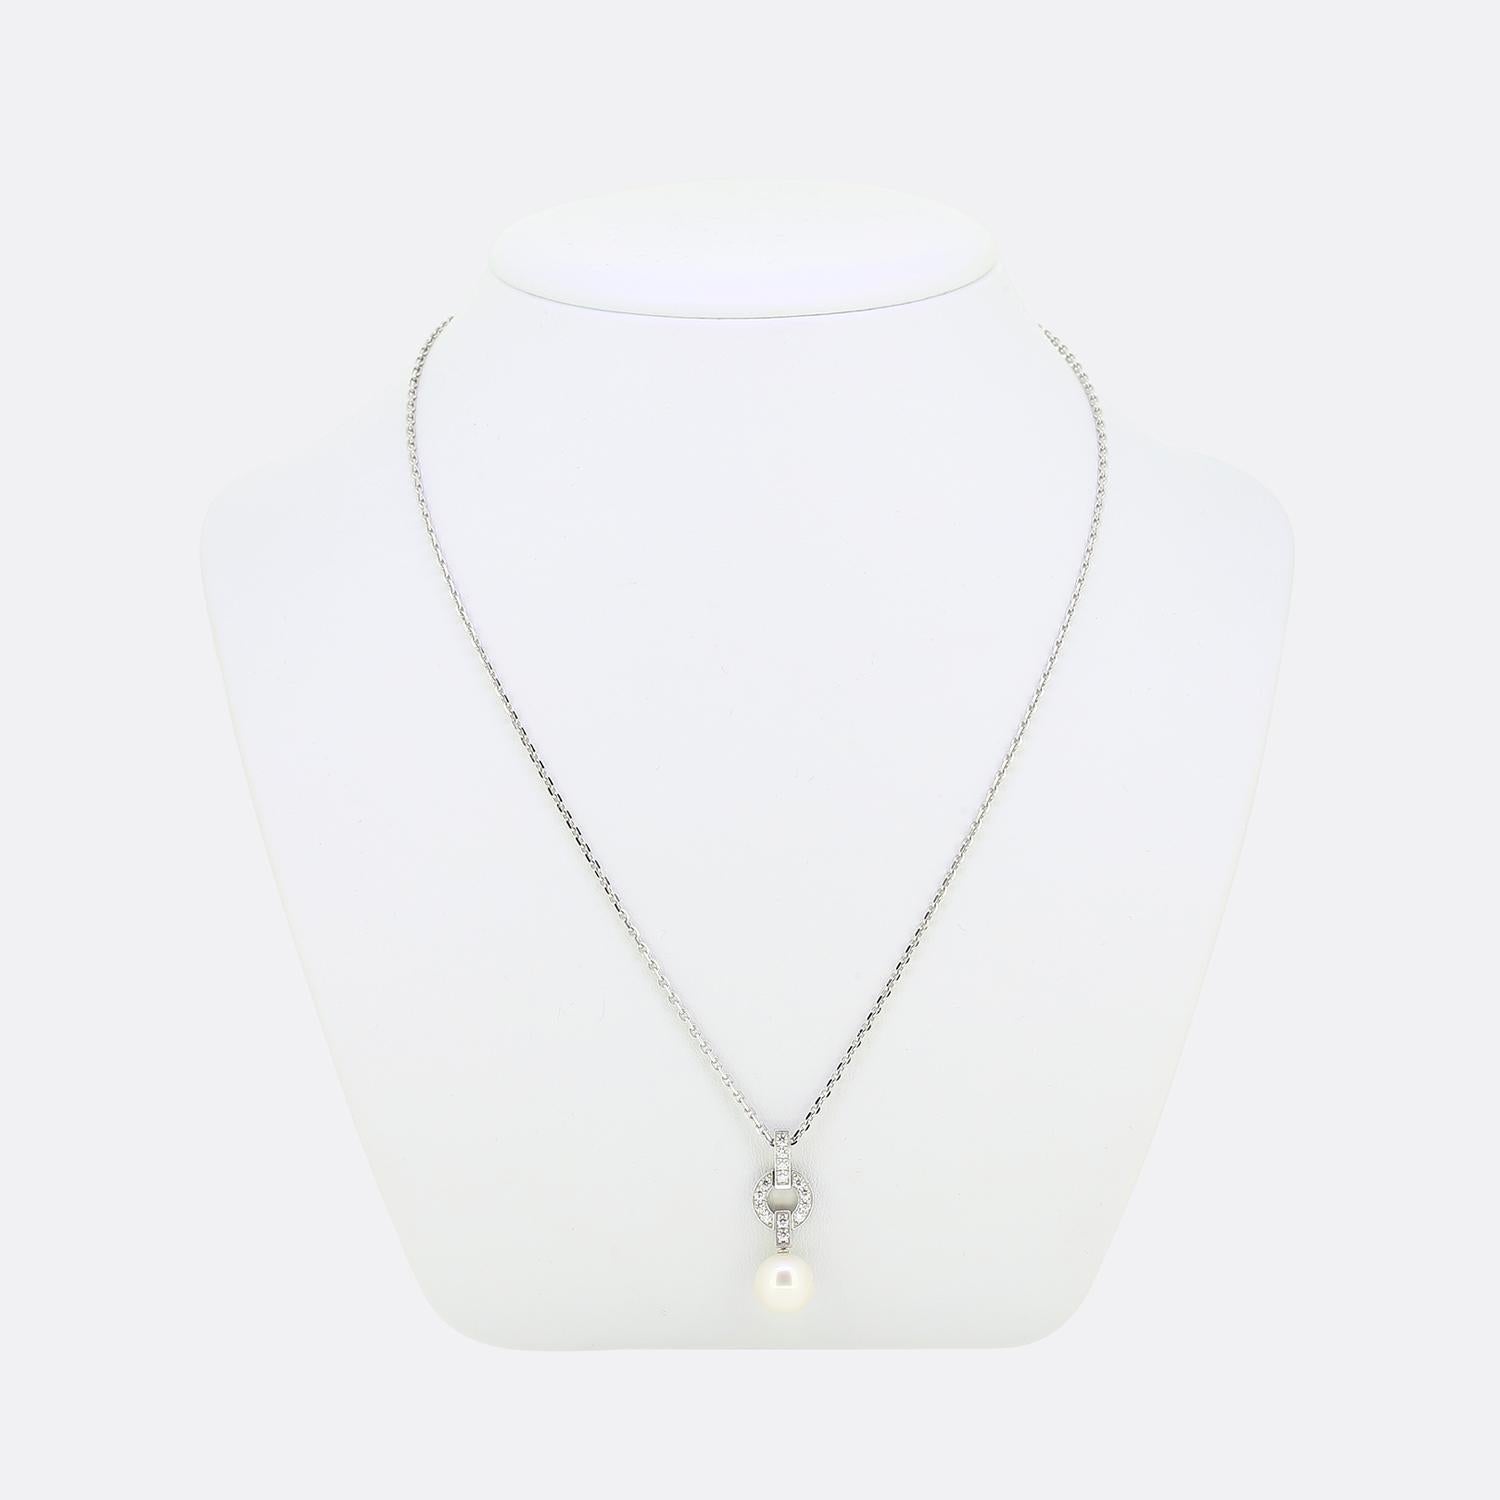 Here we have a charming necklace from the world renowned jewellery house of Cartier. This elegant piece showcases an open pendant with a open minimalist design pendant and filled with exquisite diamonds and finished with a large rounded pearl below.